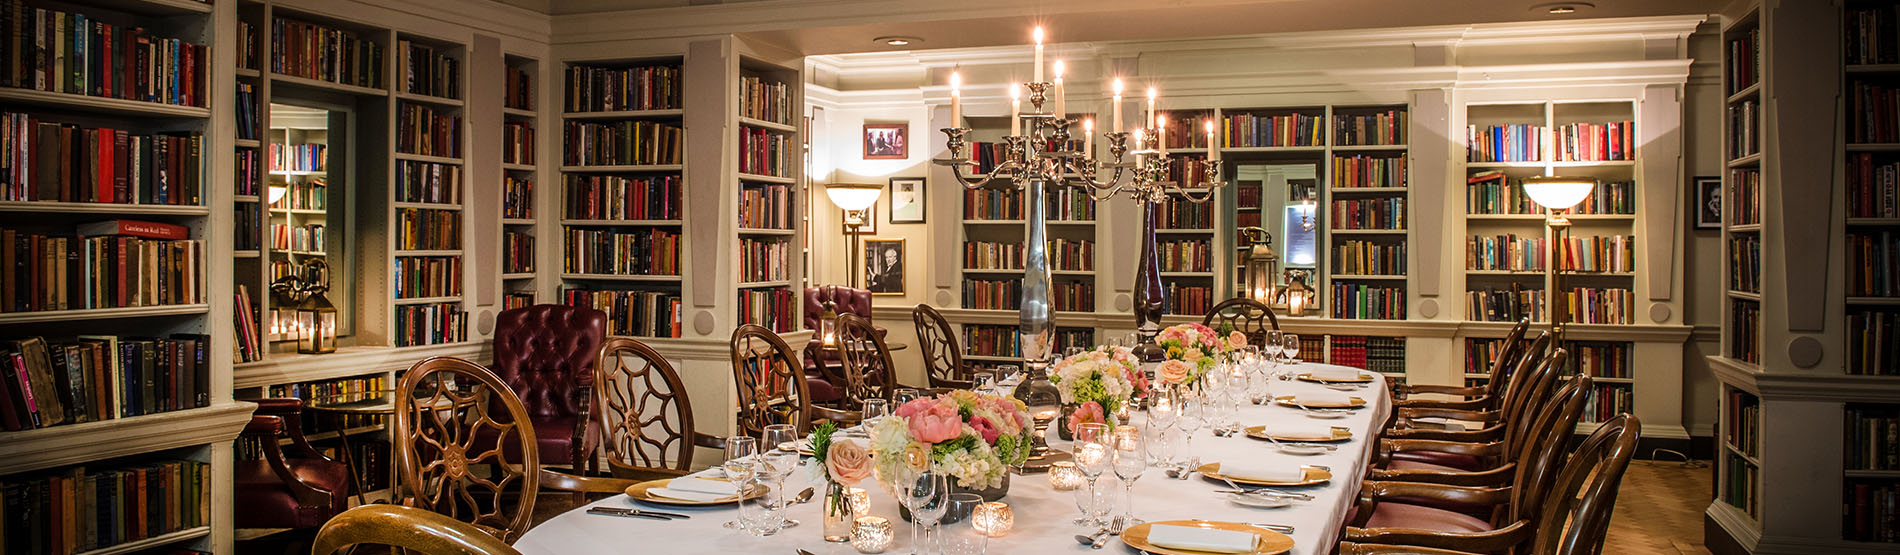 Private dining in The Seamus Heaney Library in The Bloomsbury